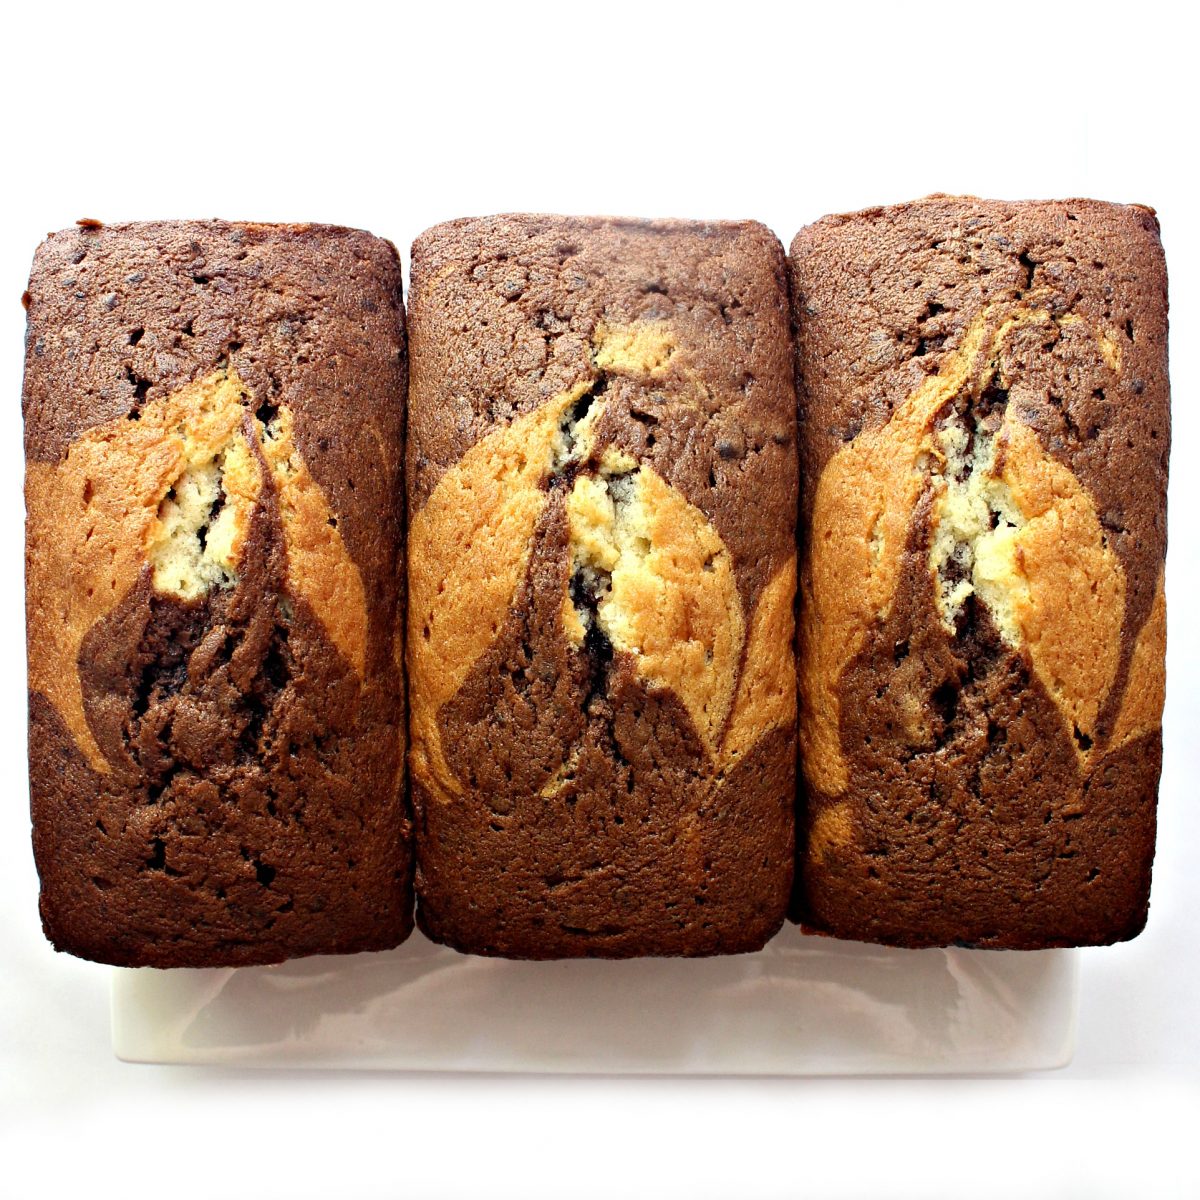 Three loaves of marbled chocolate and vanilla pound cake.